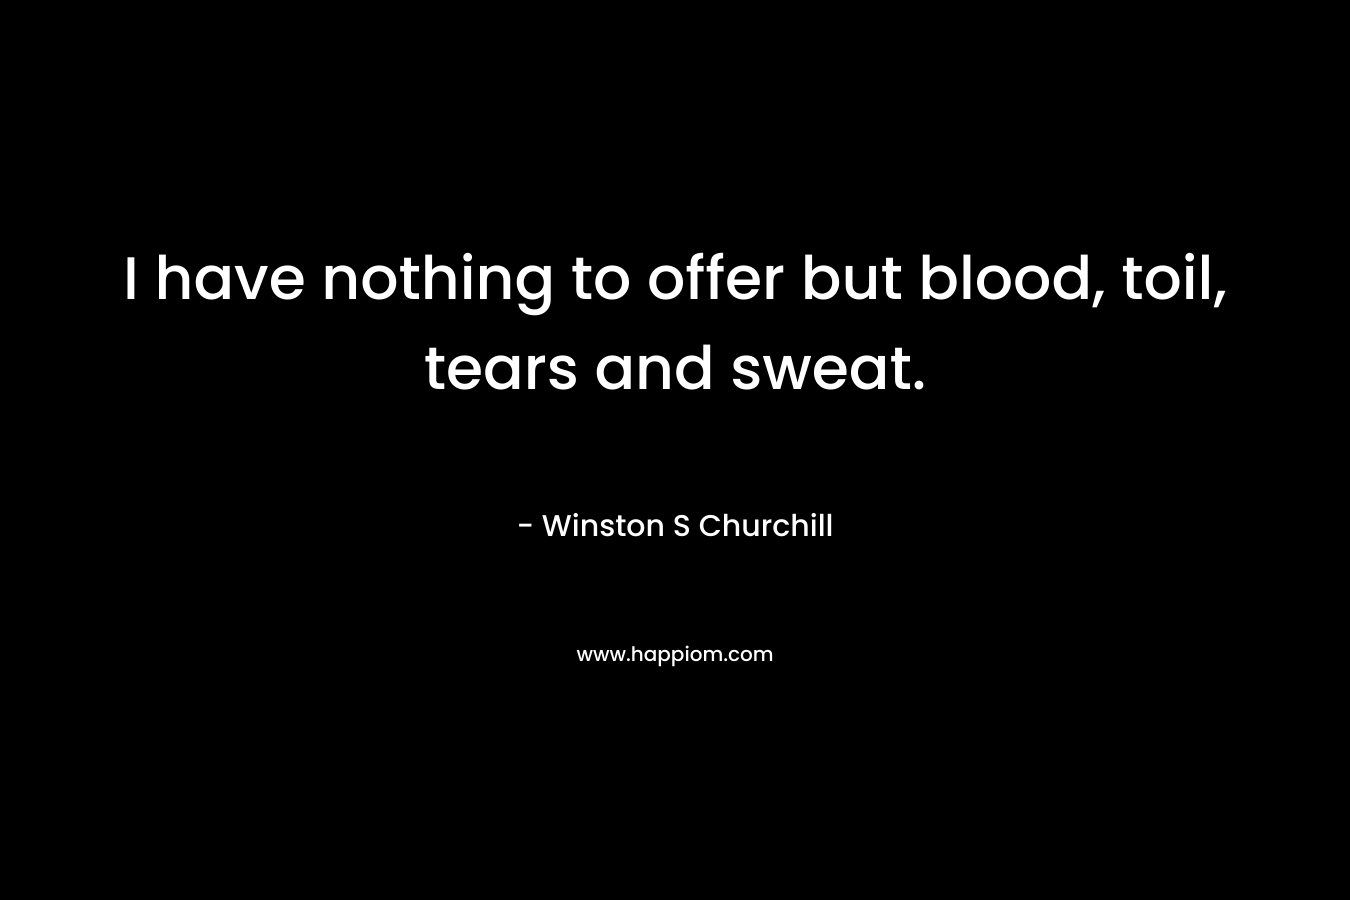 I have nothing to offer but blood, toil, tears and sweat. – Winston S Churchill